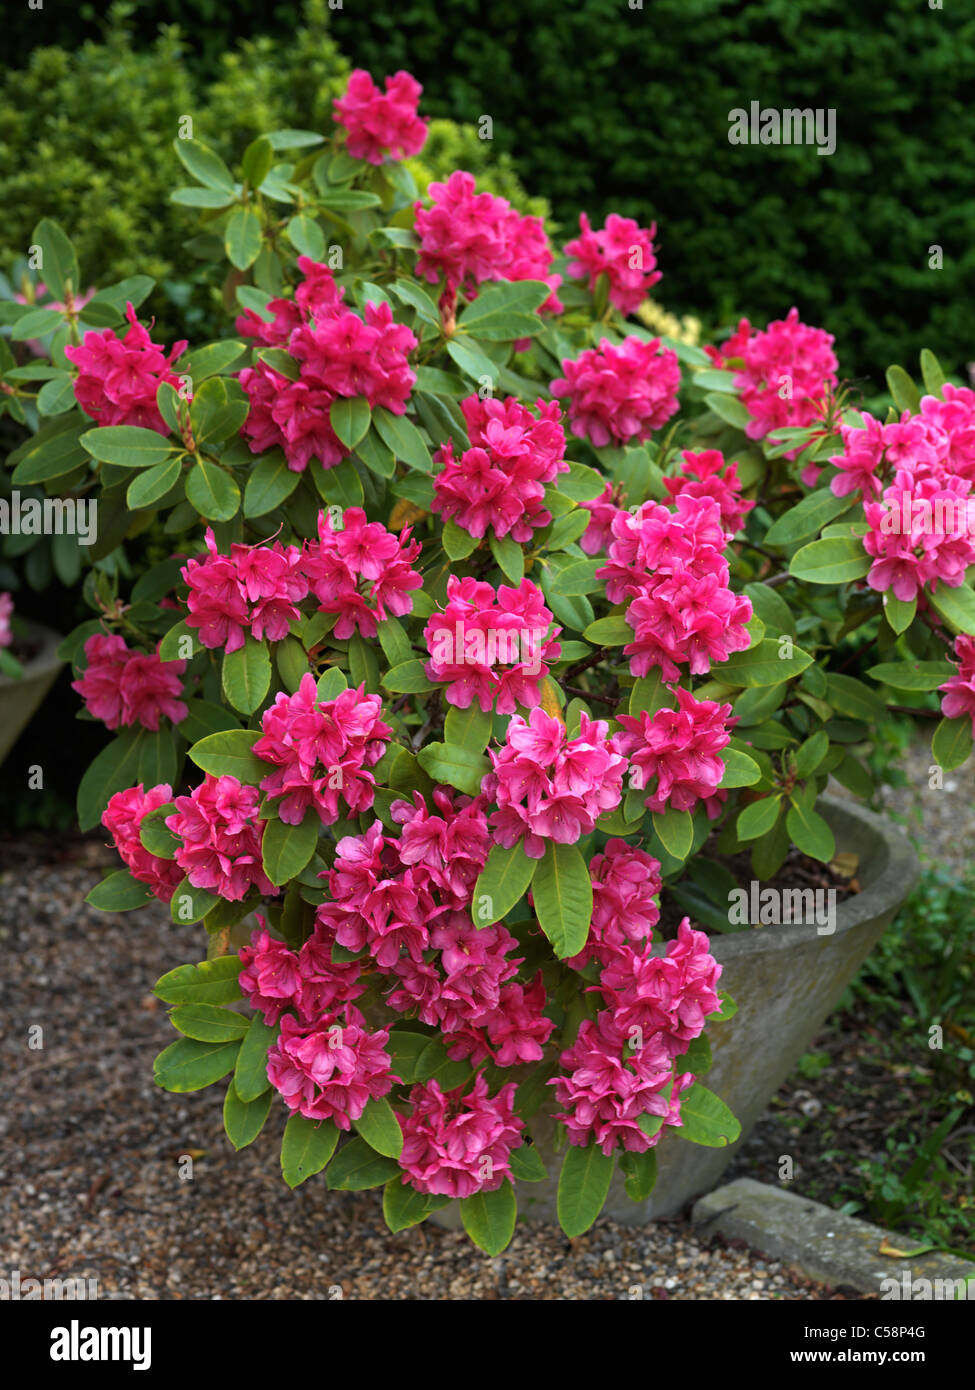 Pink Rhododendrons In Concrete Pot Stock Photo